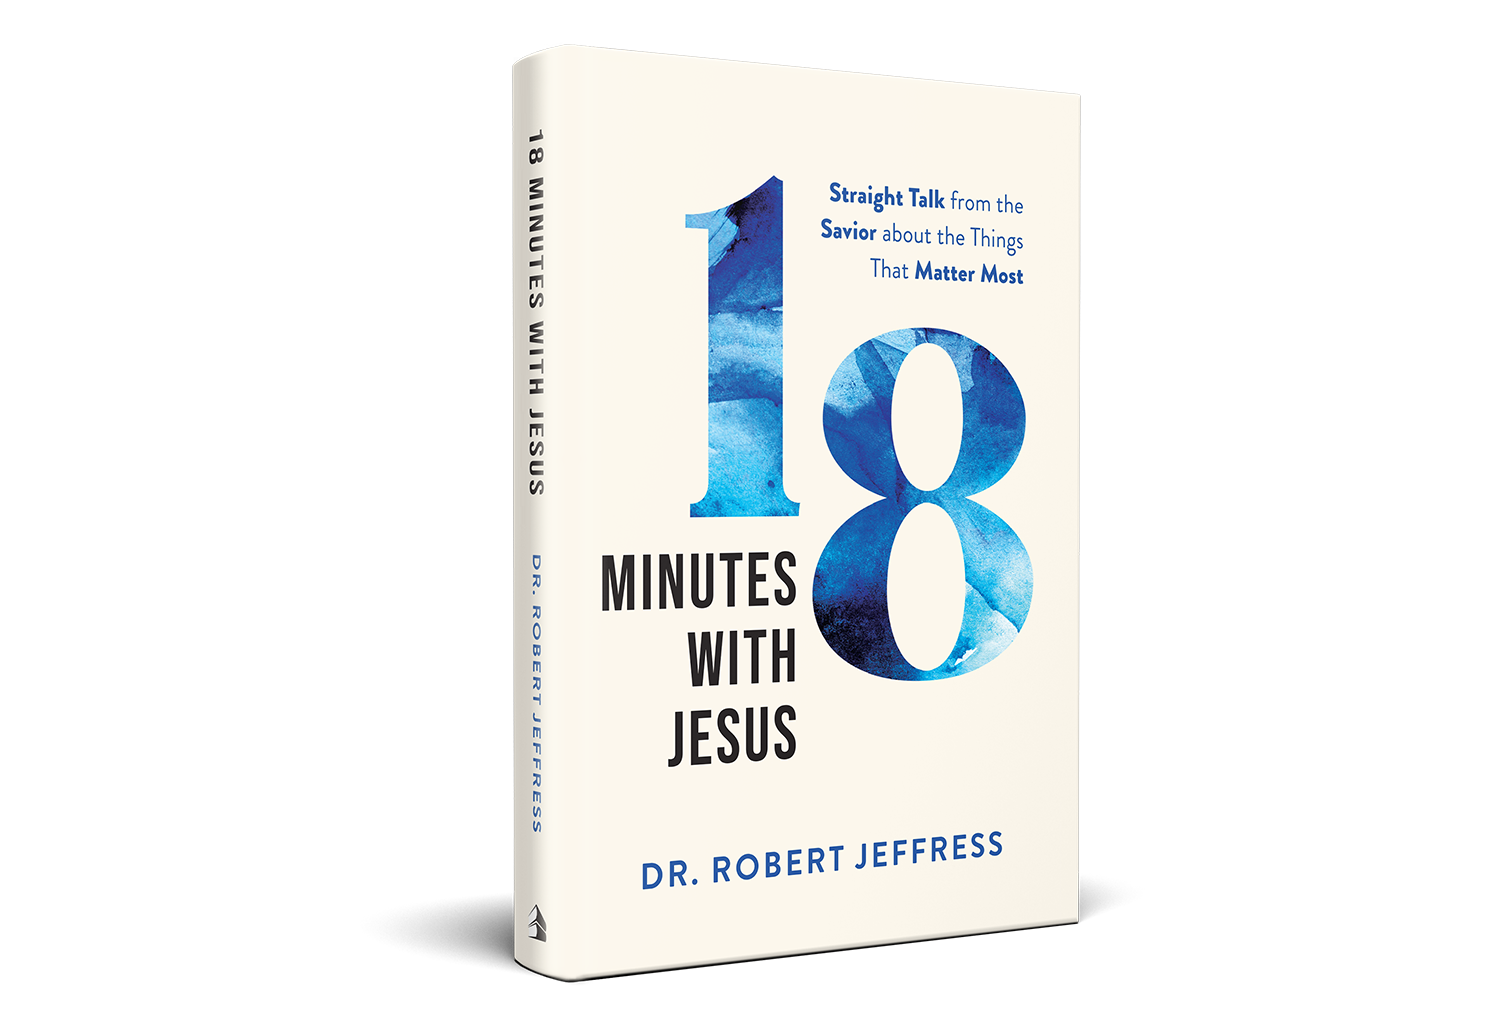 18 Minutes with Jesus by Robert Jeffress by TBN